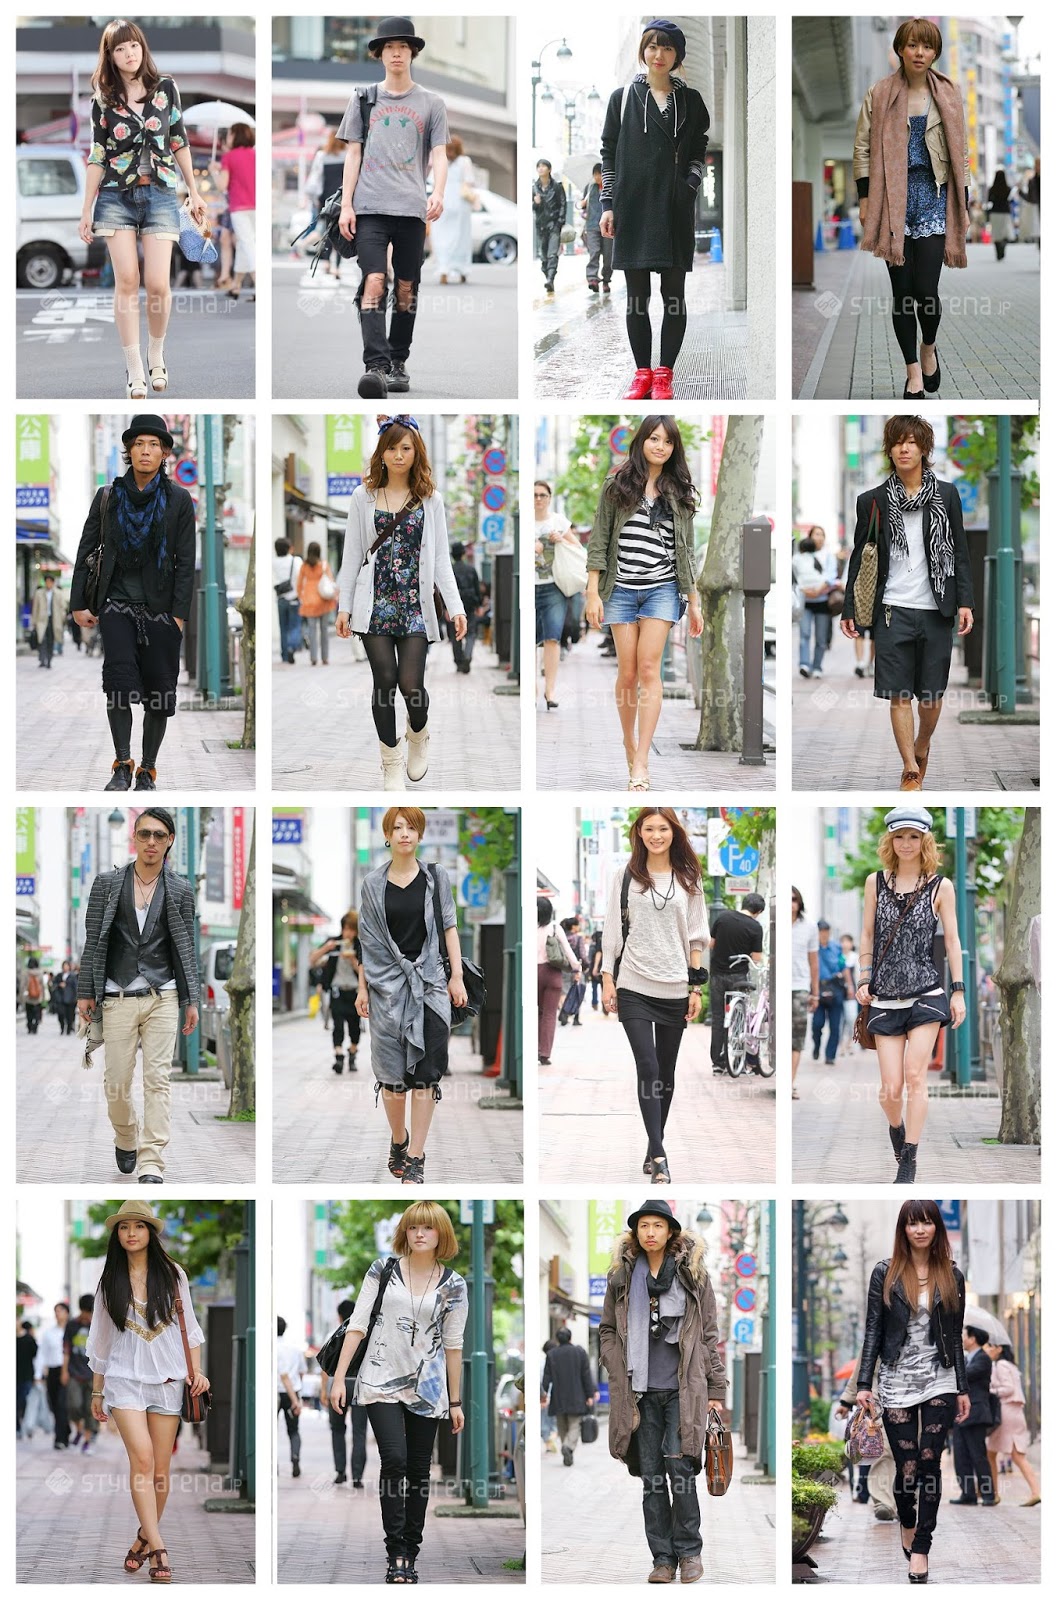 Summer Street Fashion Trends of Japan Japanese Life Styles